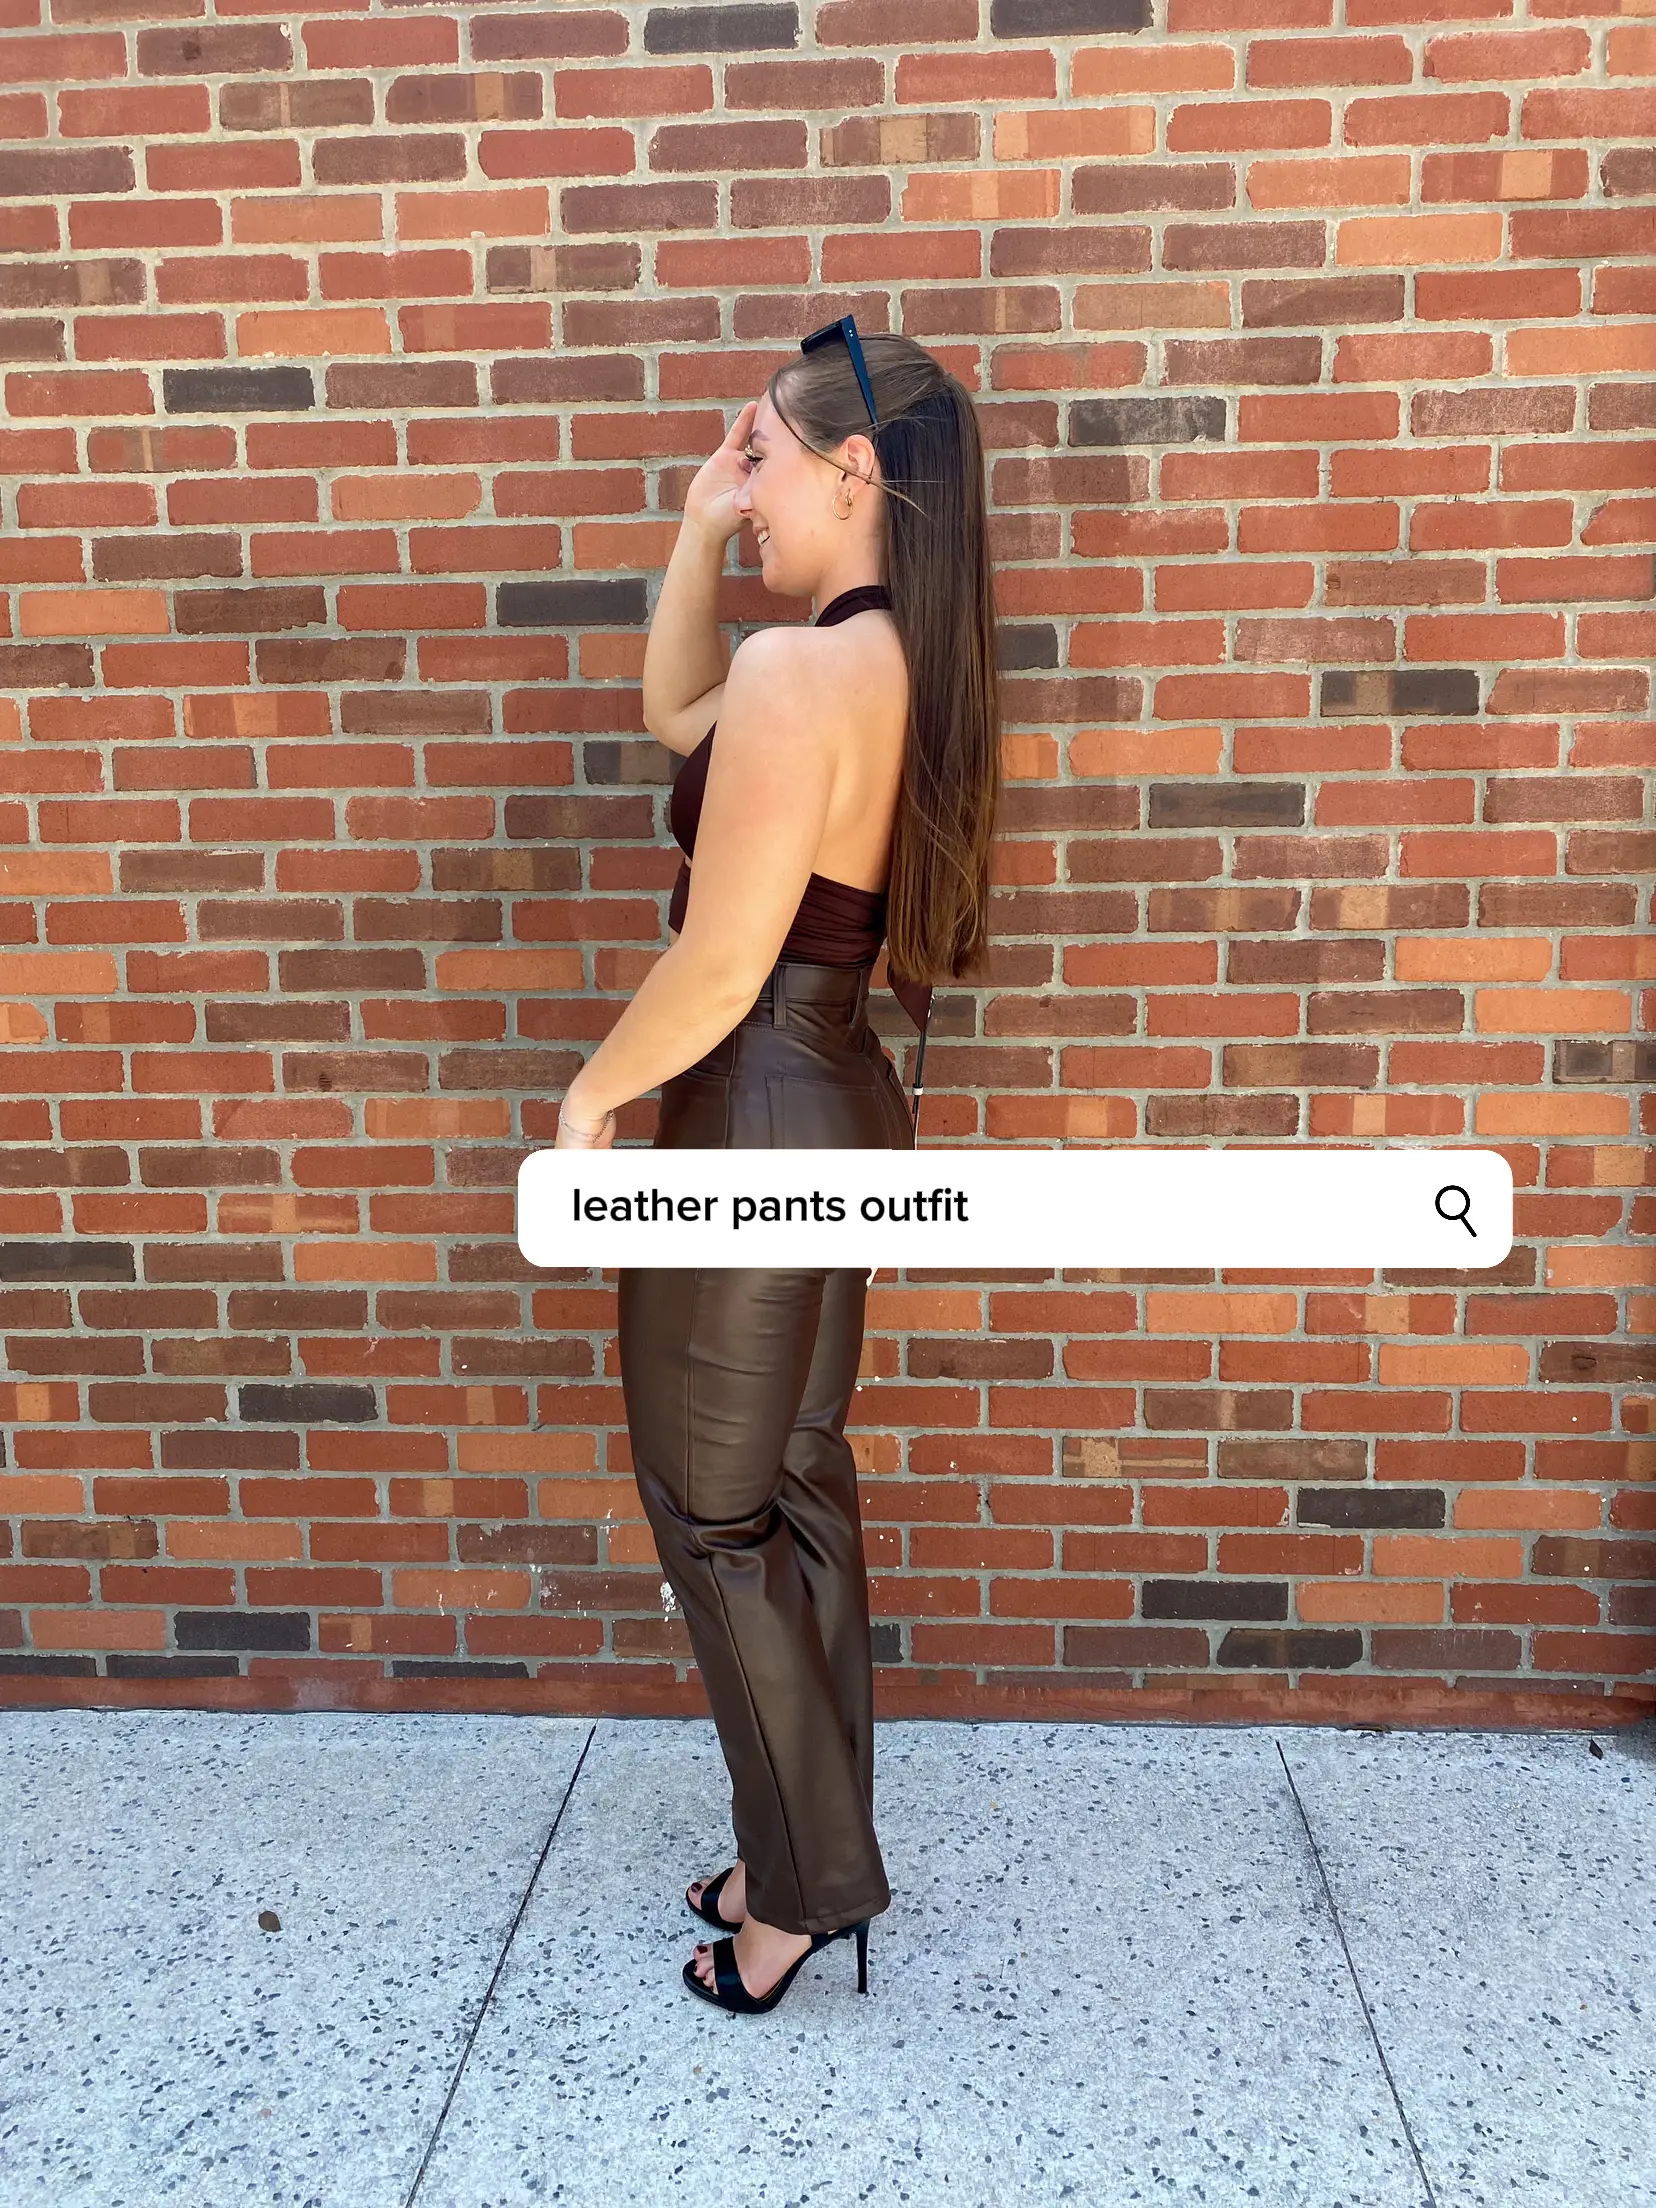 leather pants outfit idea!, Gallery posted by Jess